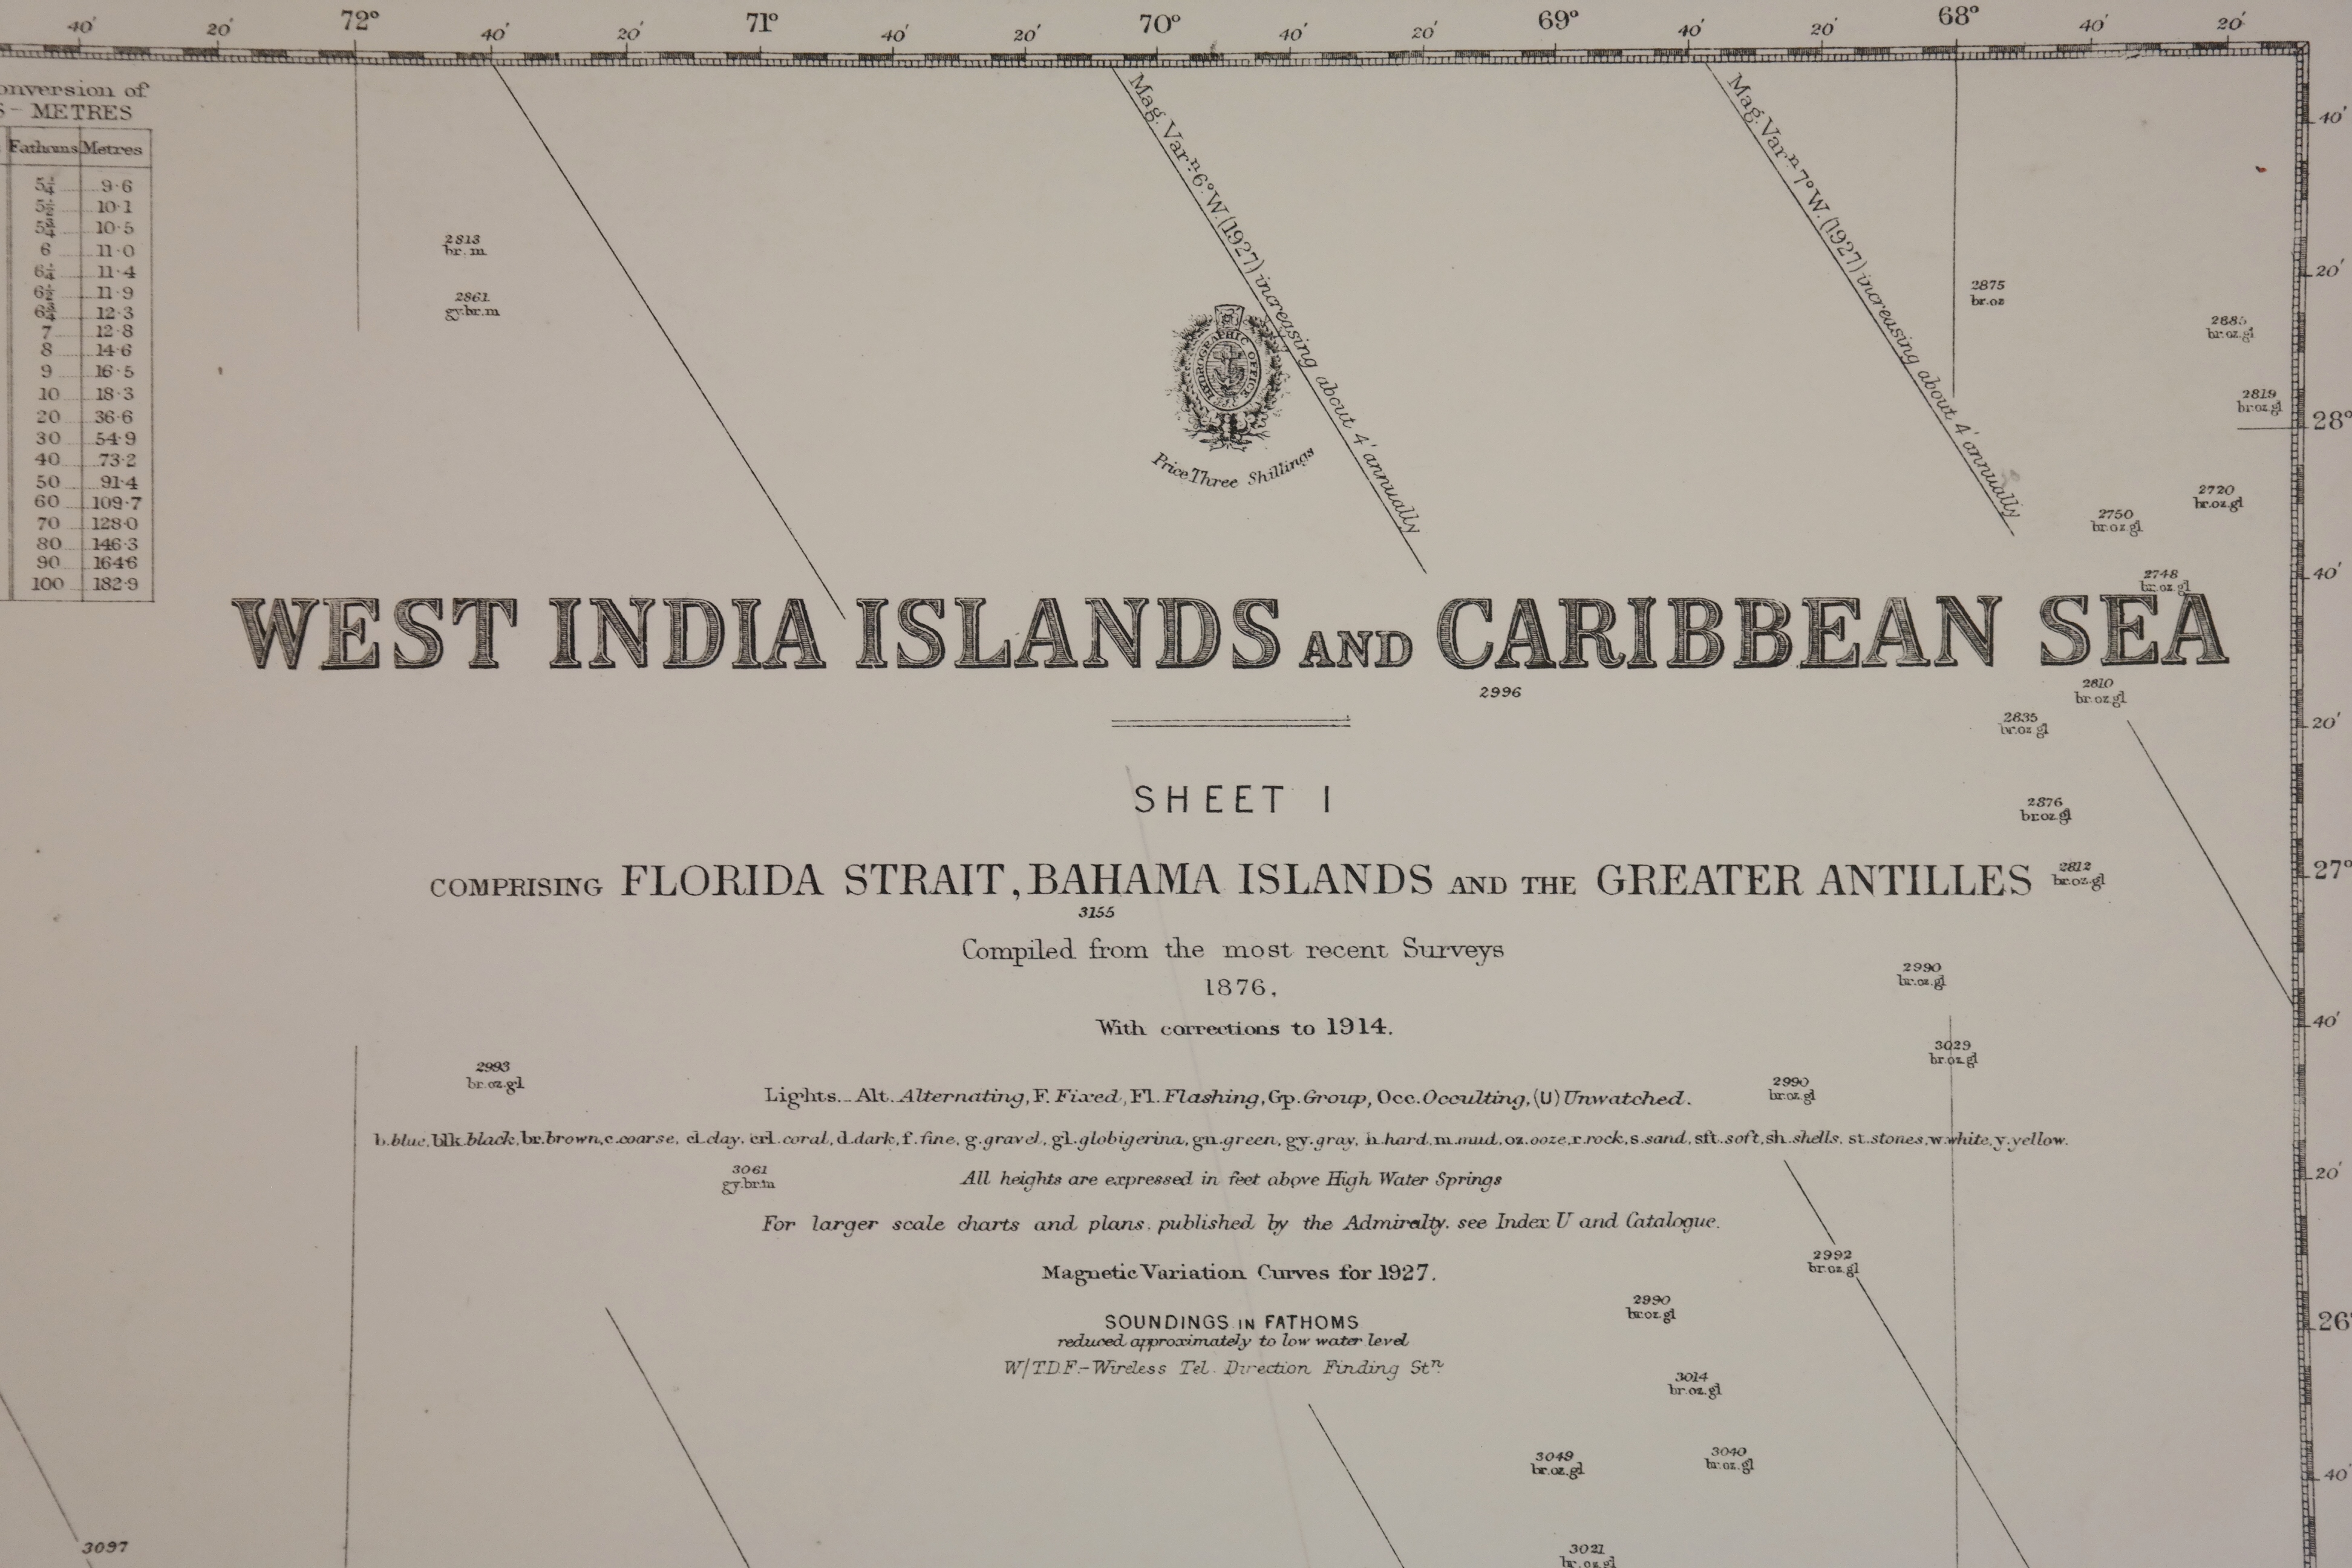 Cuba, Florida, Bahama’s and Greater Antilles British – Admiralty Chart 761, published in 1876